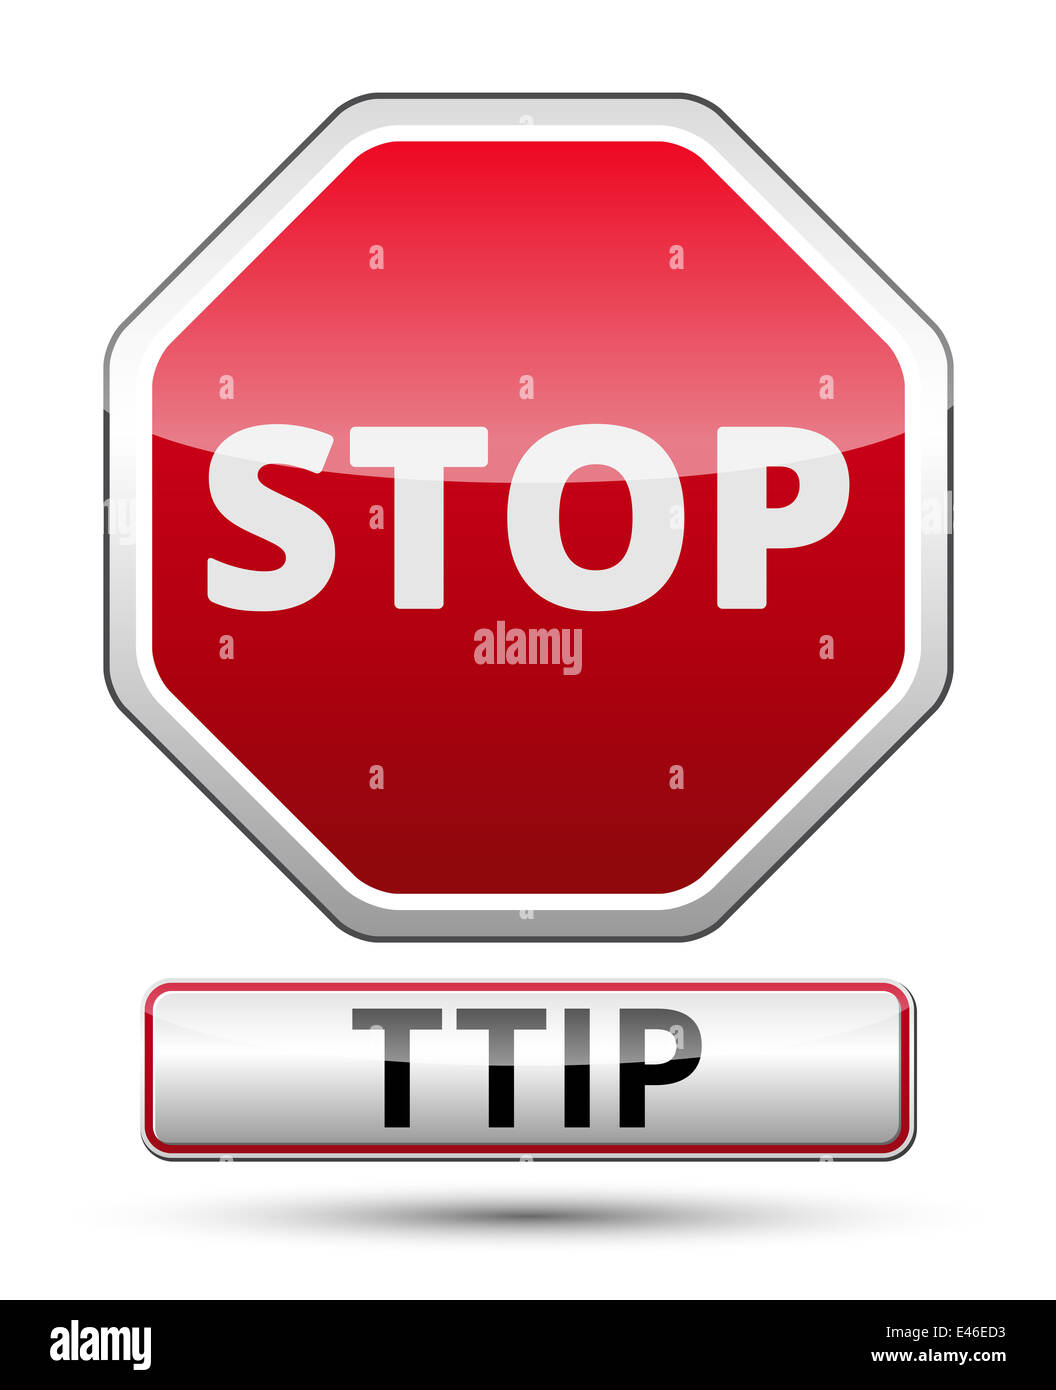 TTIP - Transatlantic Trade and Investment Partnership glossy illustration with shadow on white background Stock Photo